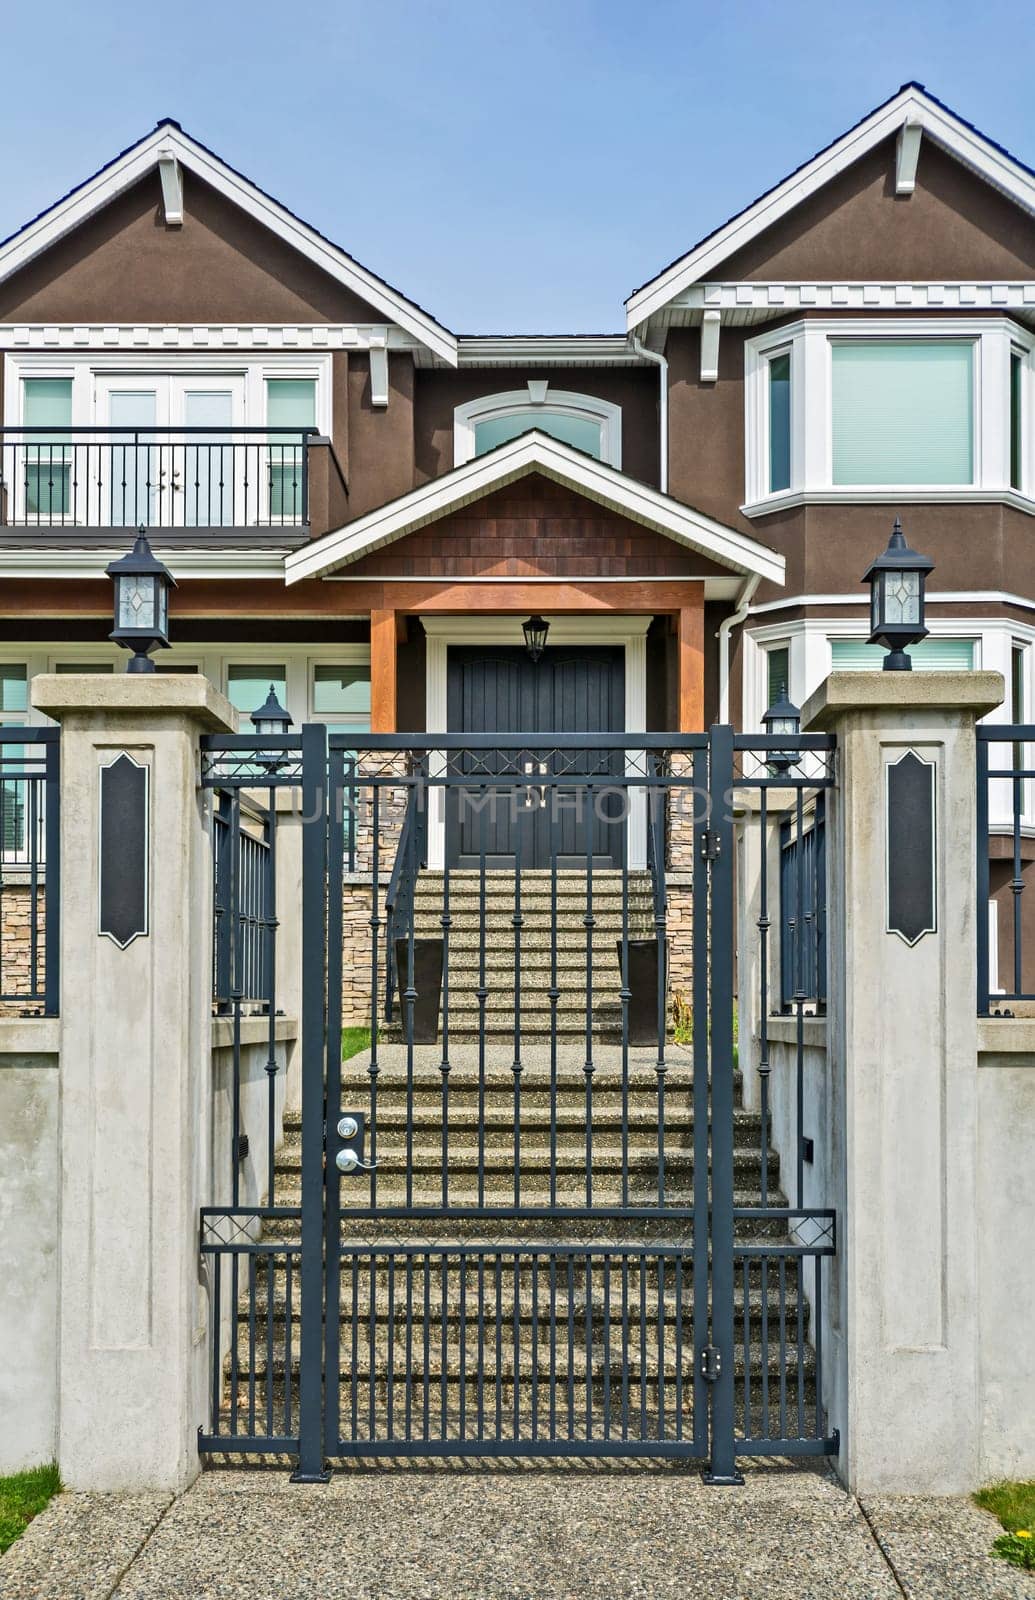 Luxury residential houses with metal gate at the front.